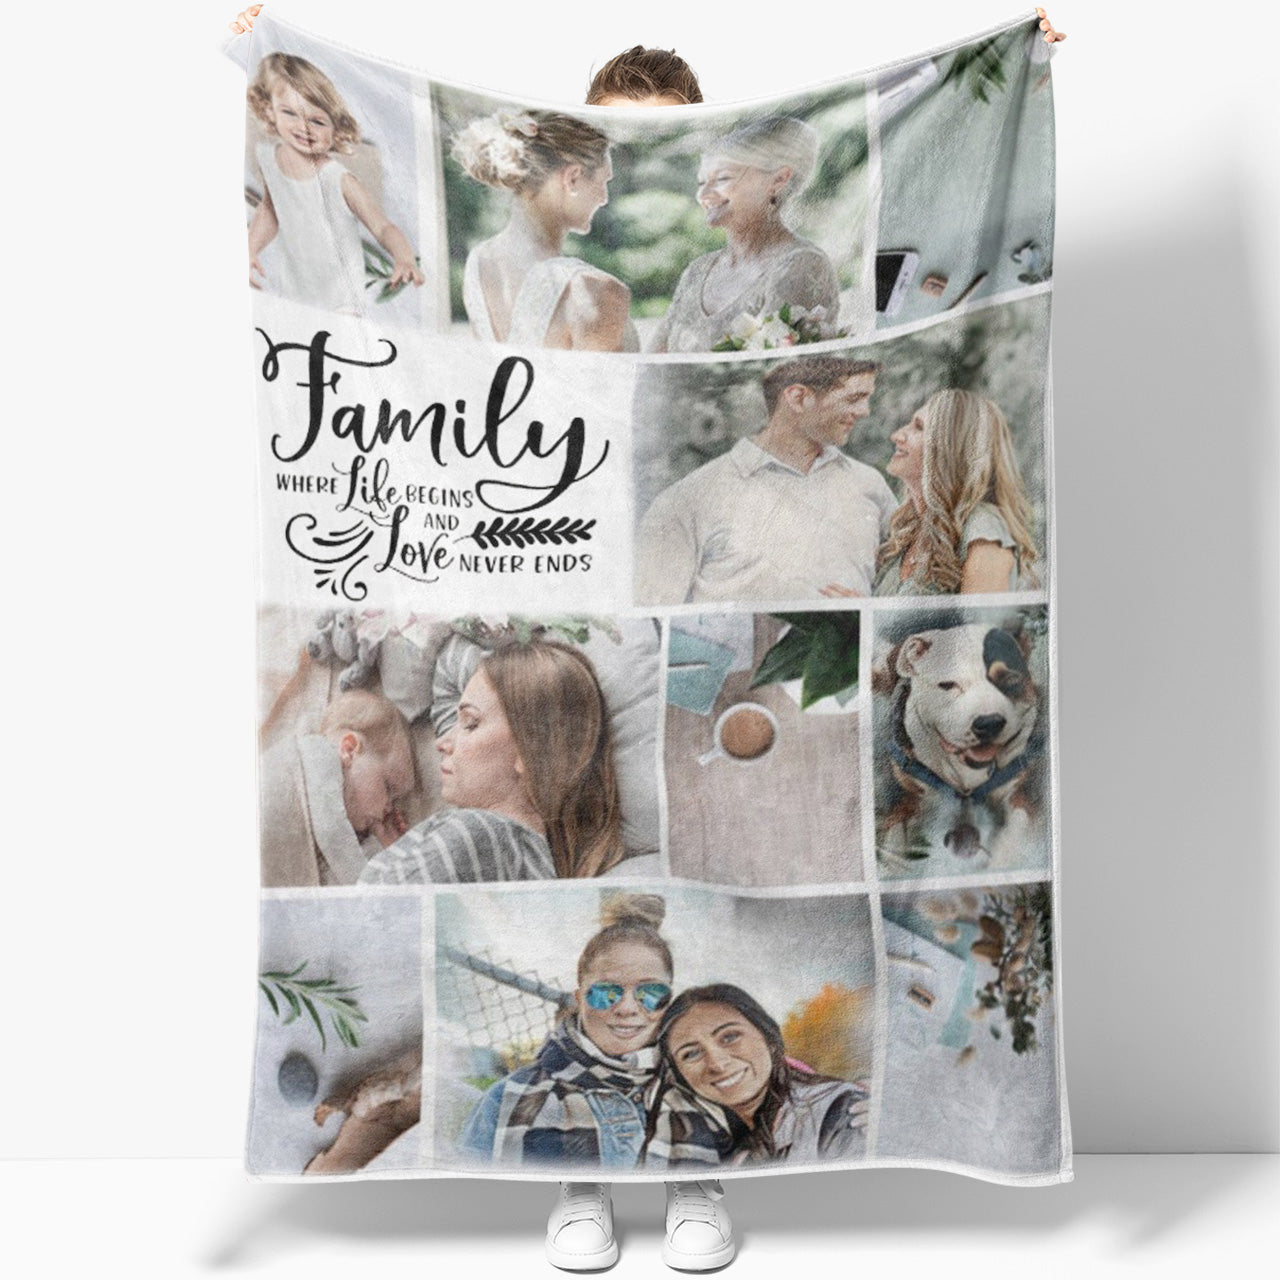 Personalized Blanket for Adults Home Decorations, Personalized Photo Blanket Collage